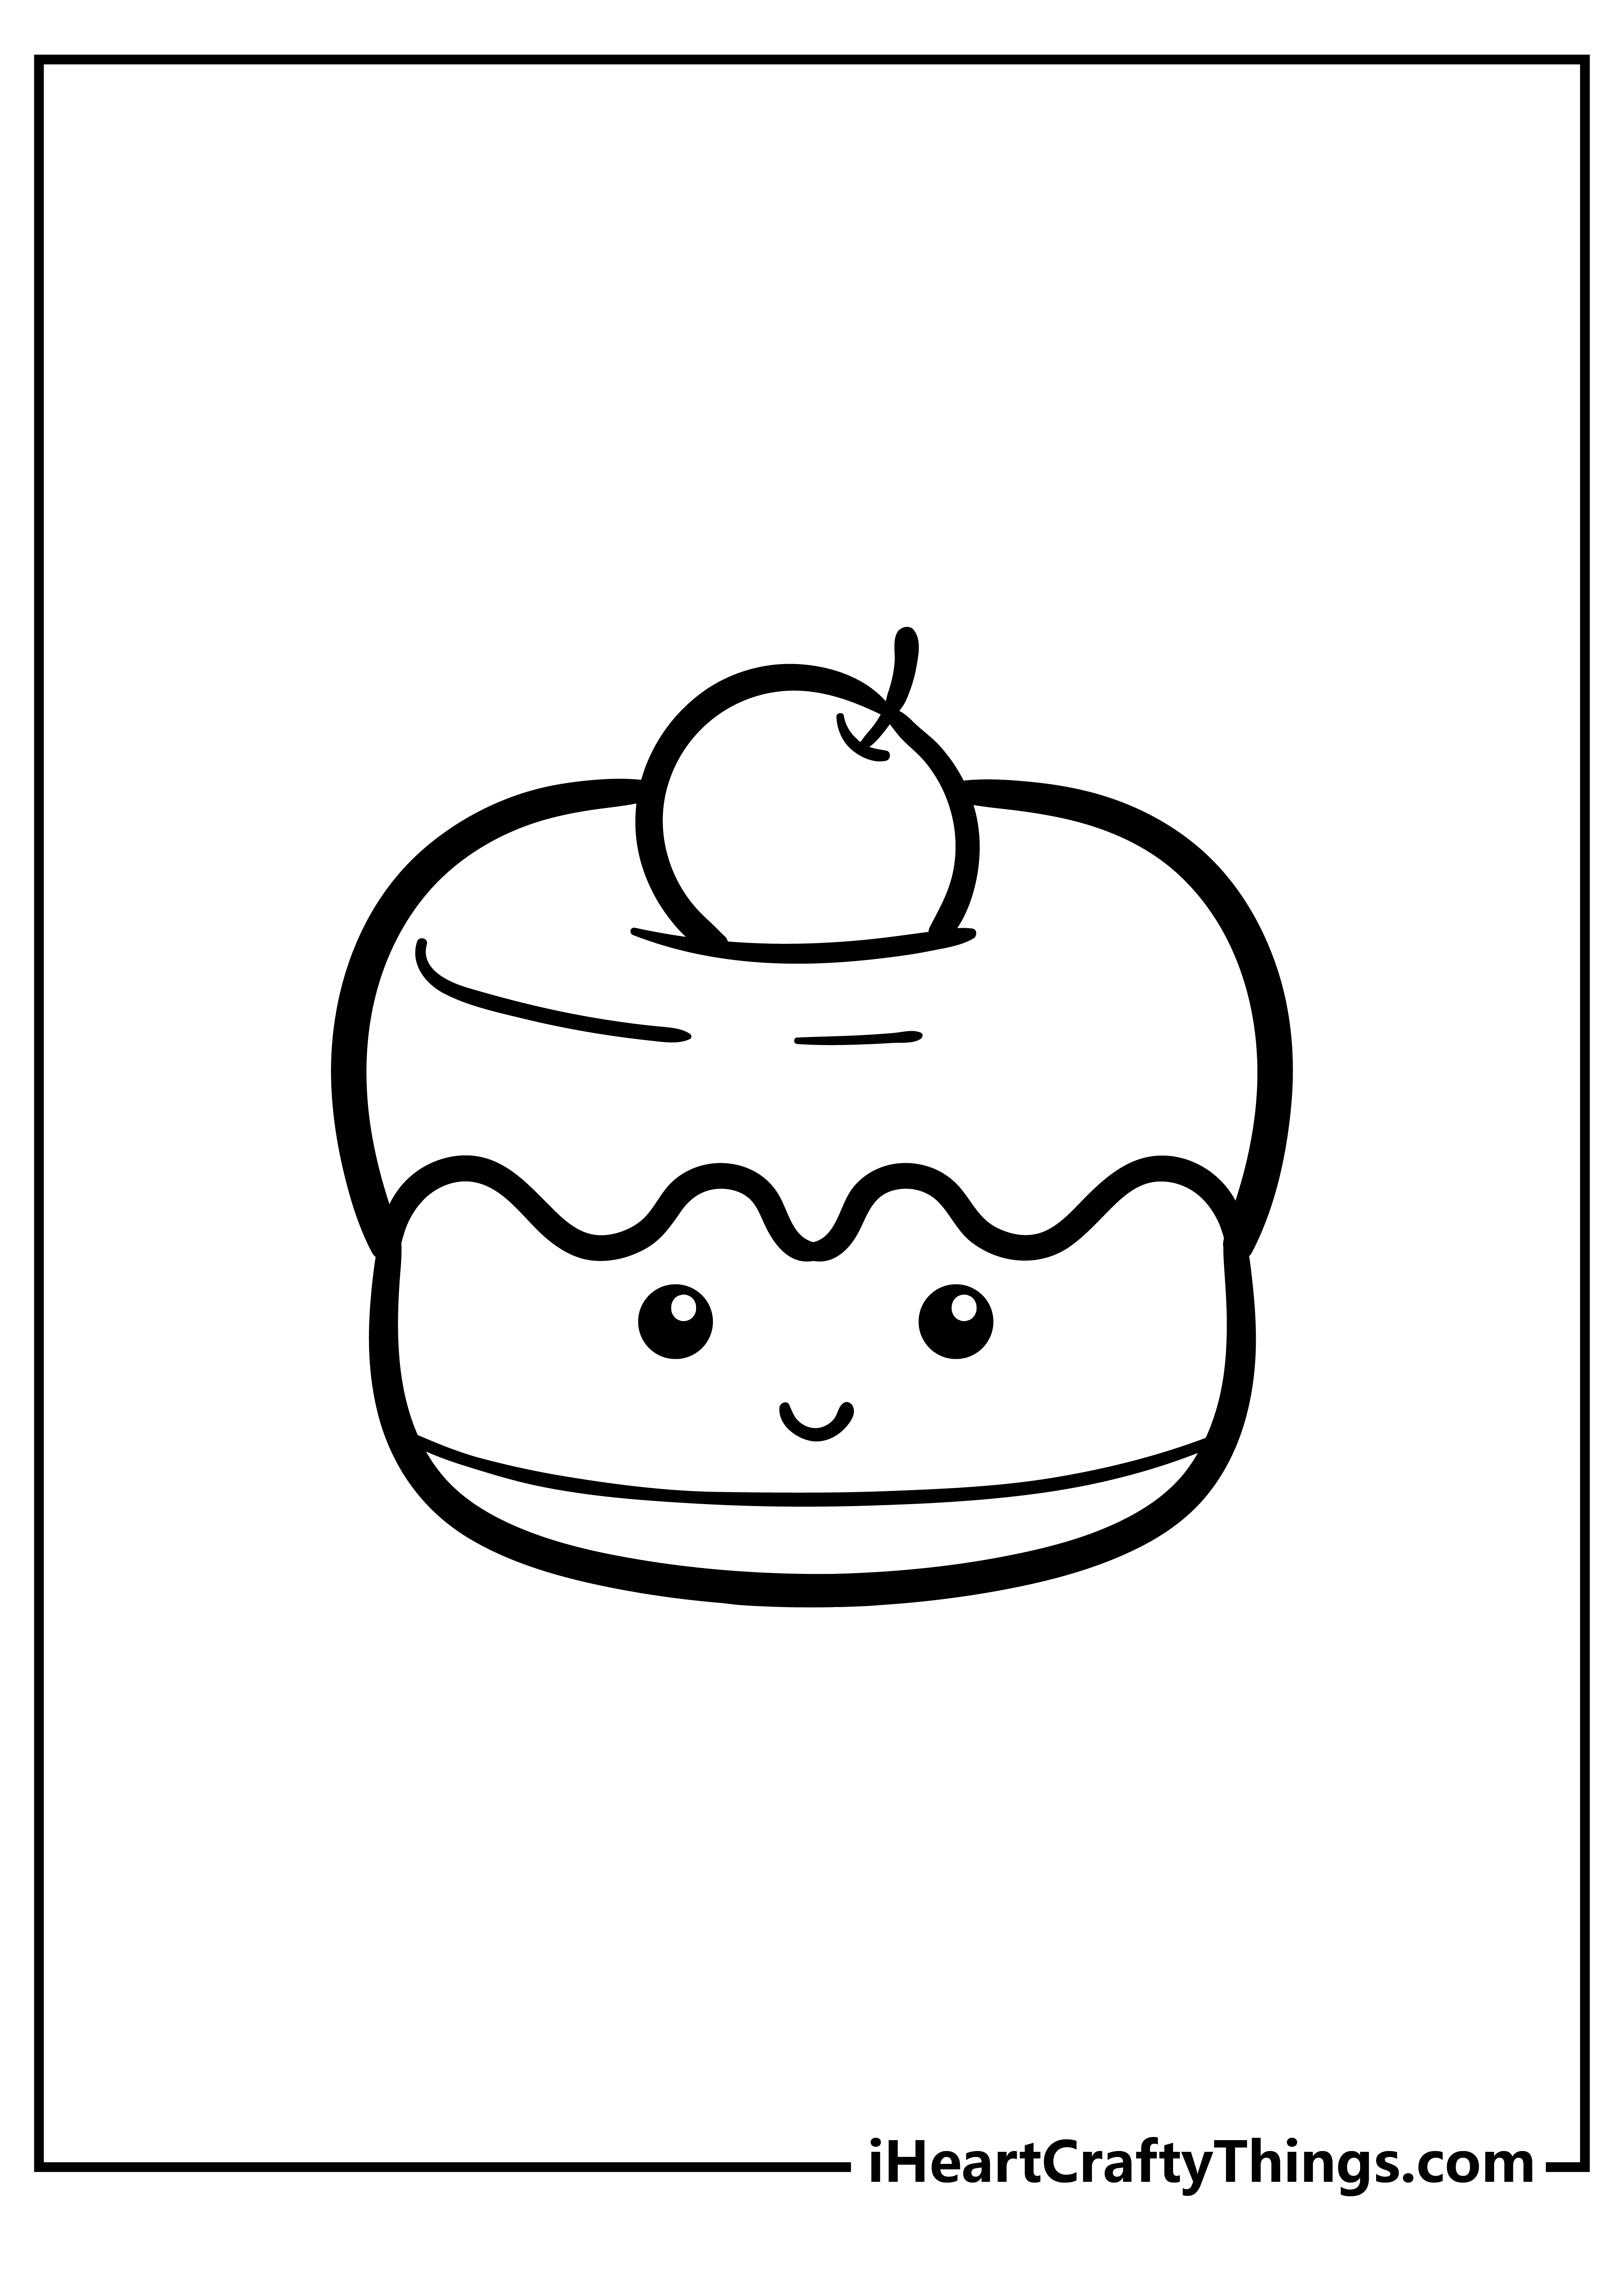 Cute Food Coloring Pages for kids free download